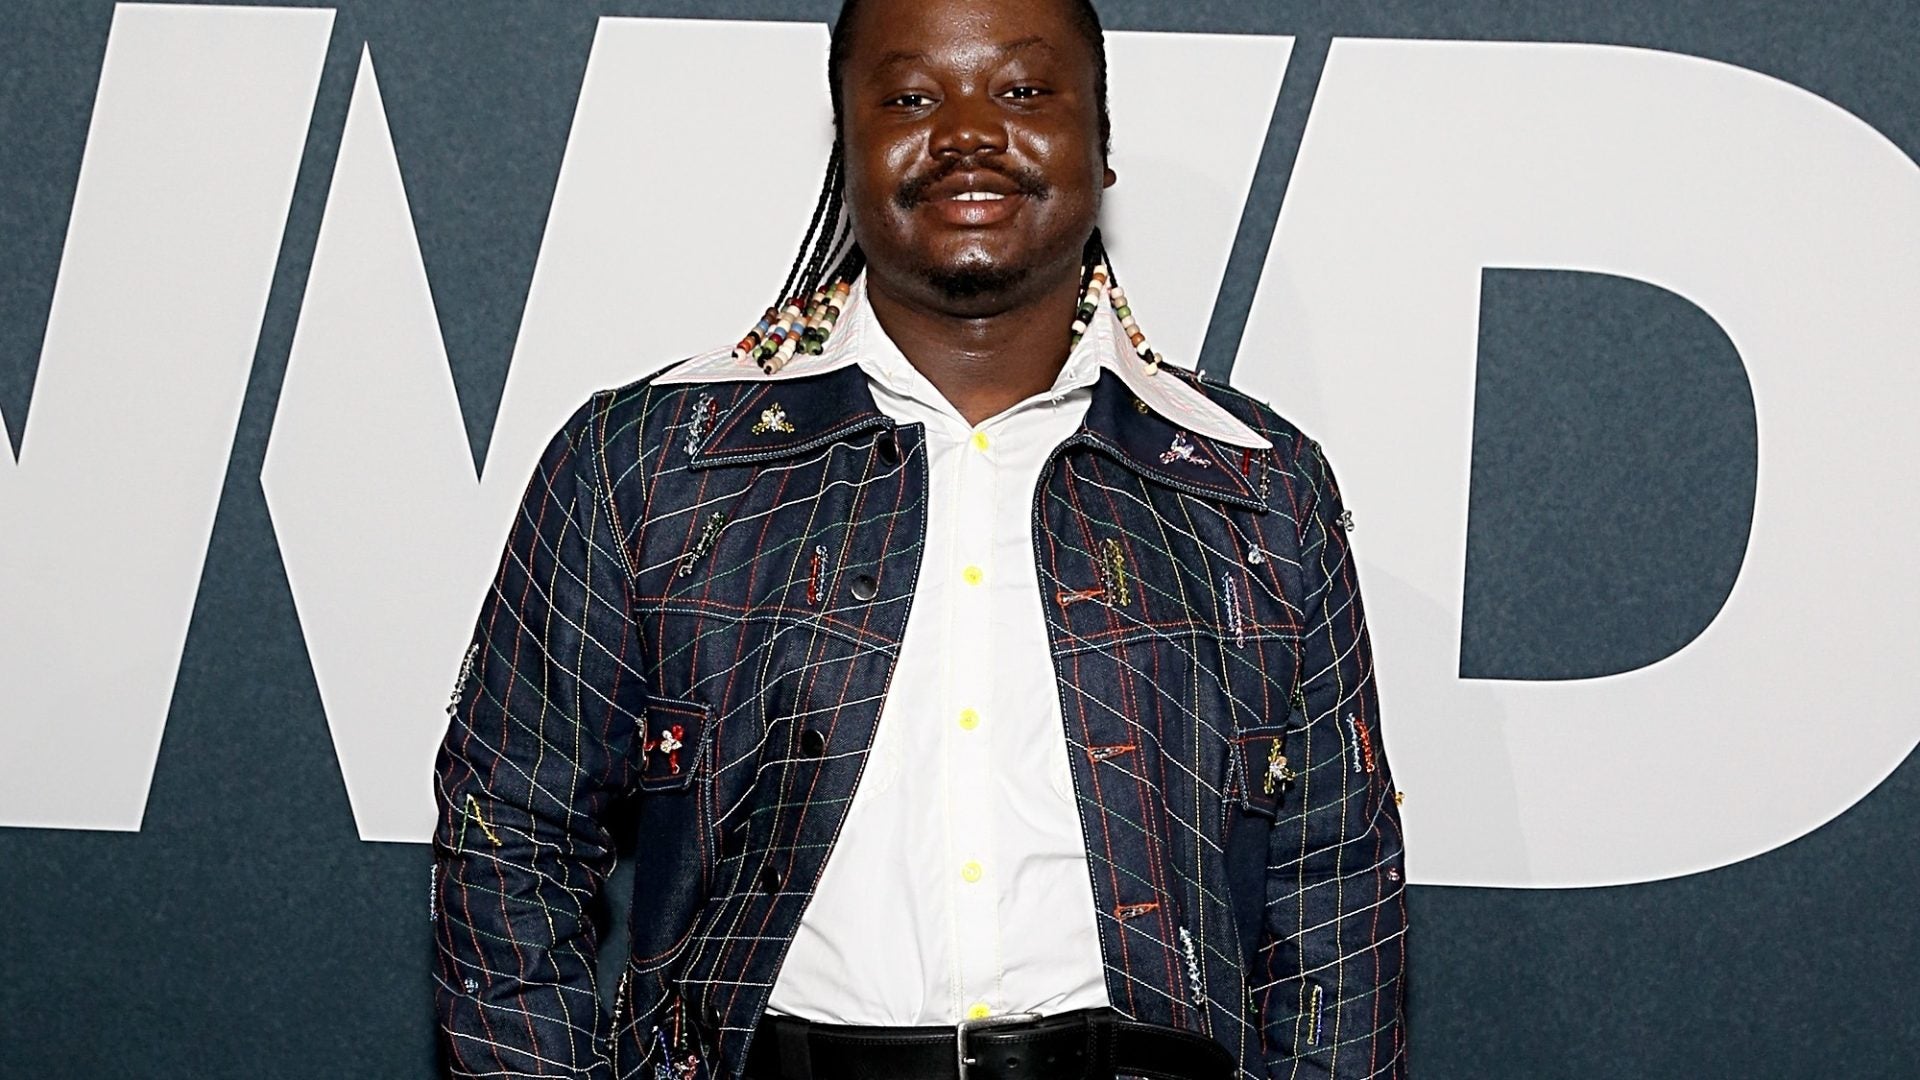 Designer Jacques Agbobly Wins WWD’s “One To Watch Award